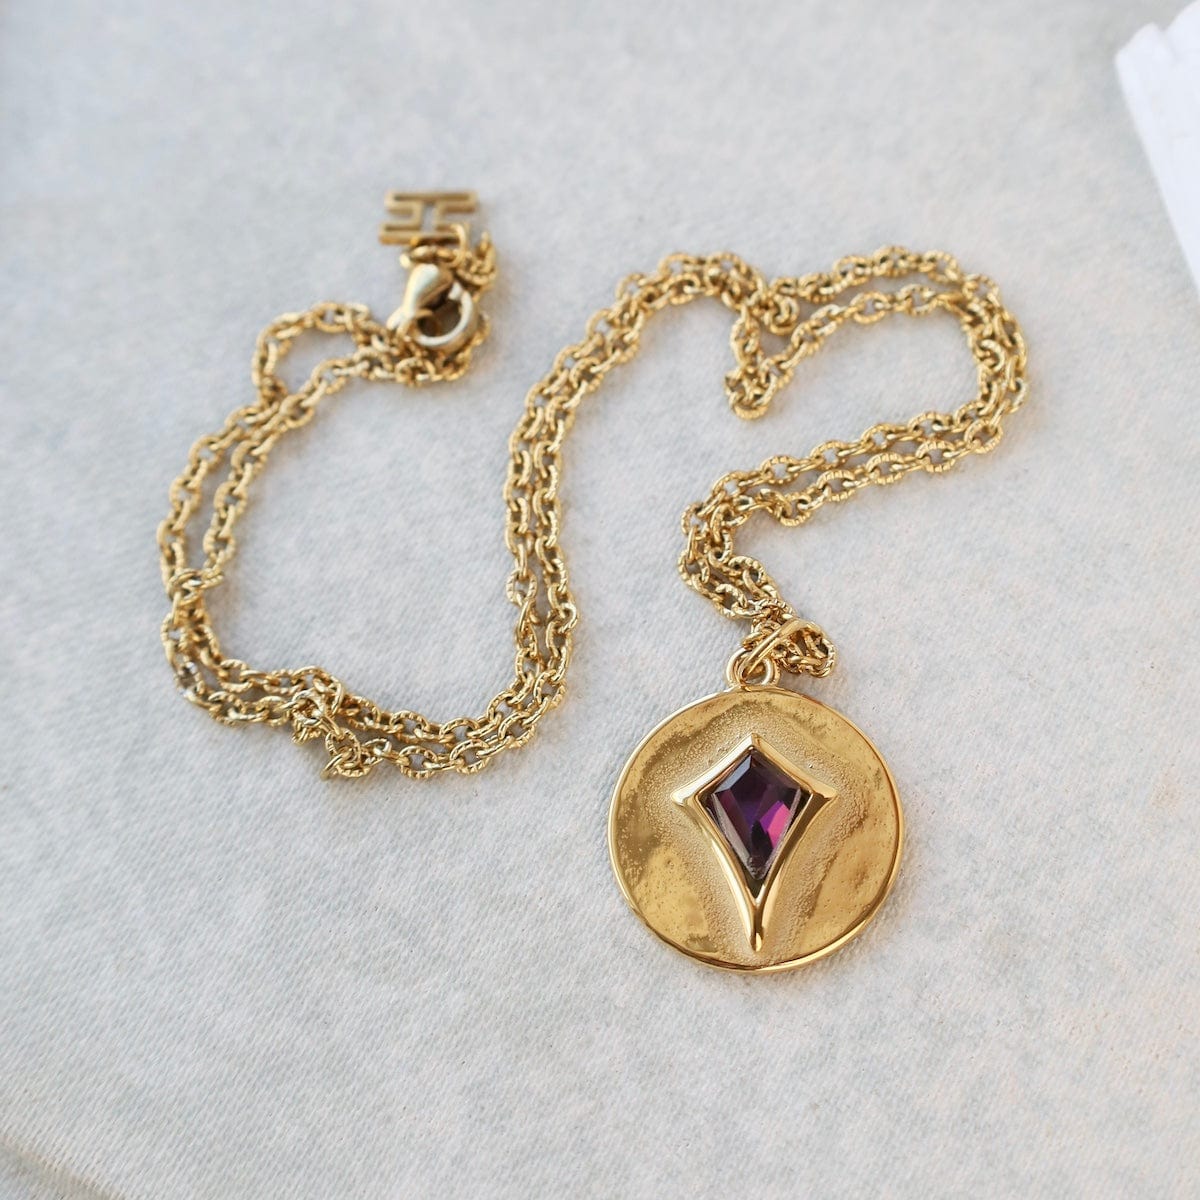 NKL-GPL Carmen// The  necklace - 18k gold plated stainless